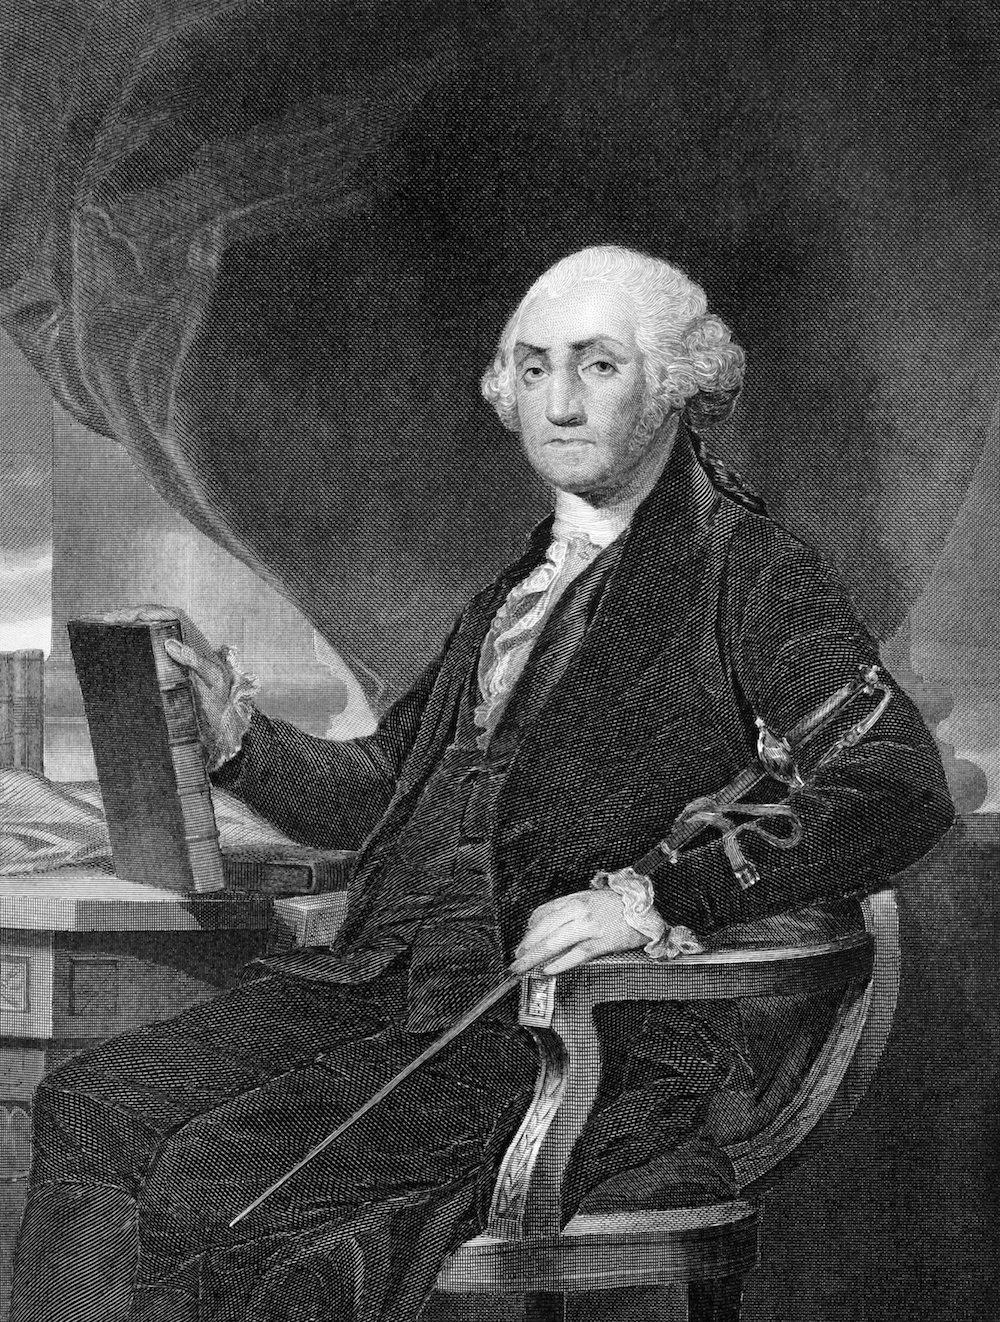 George Washington (1731-1799) on engraving from 1859